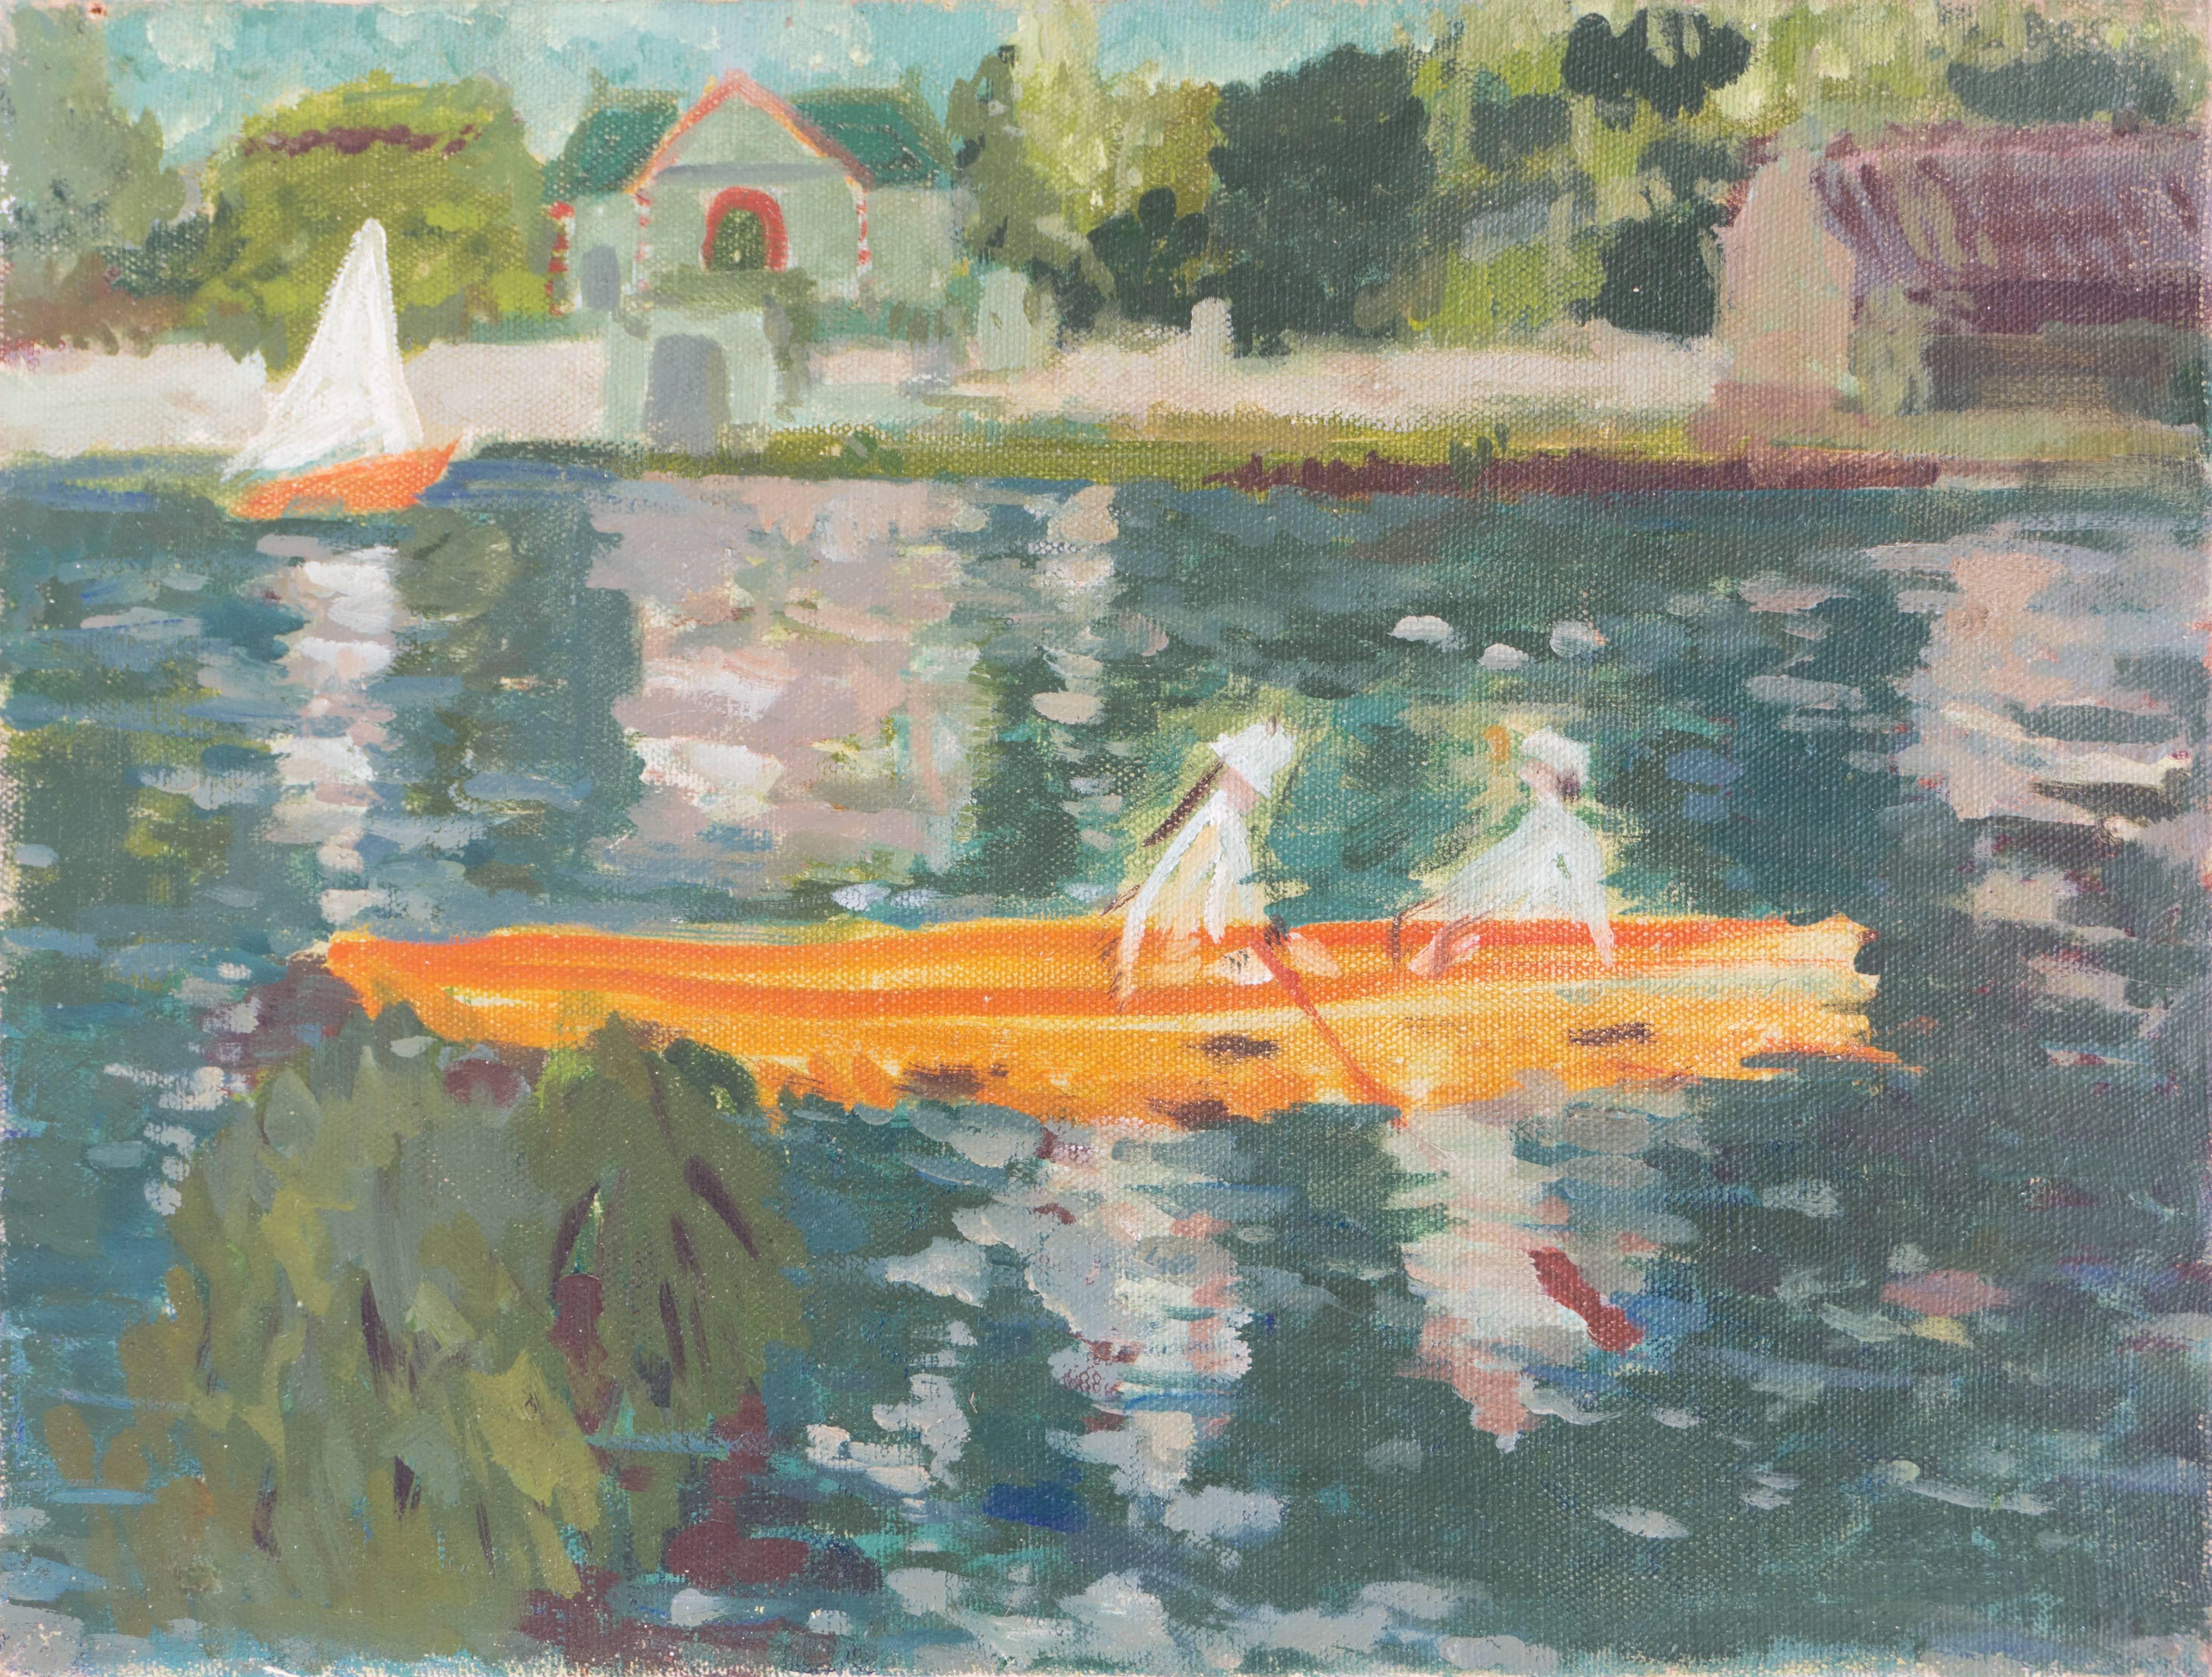 Boating on a Lake - Painting by Unknown